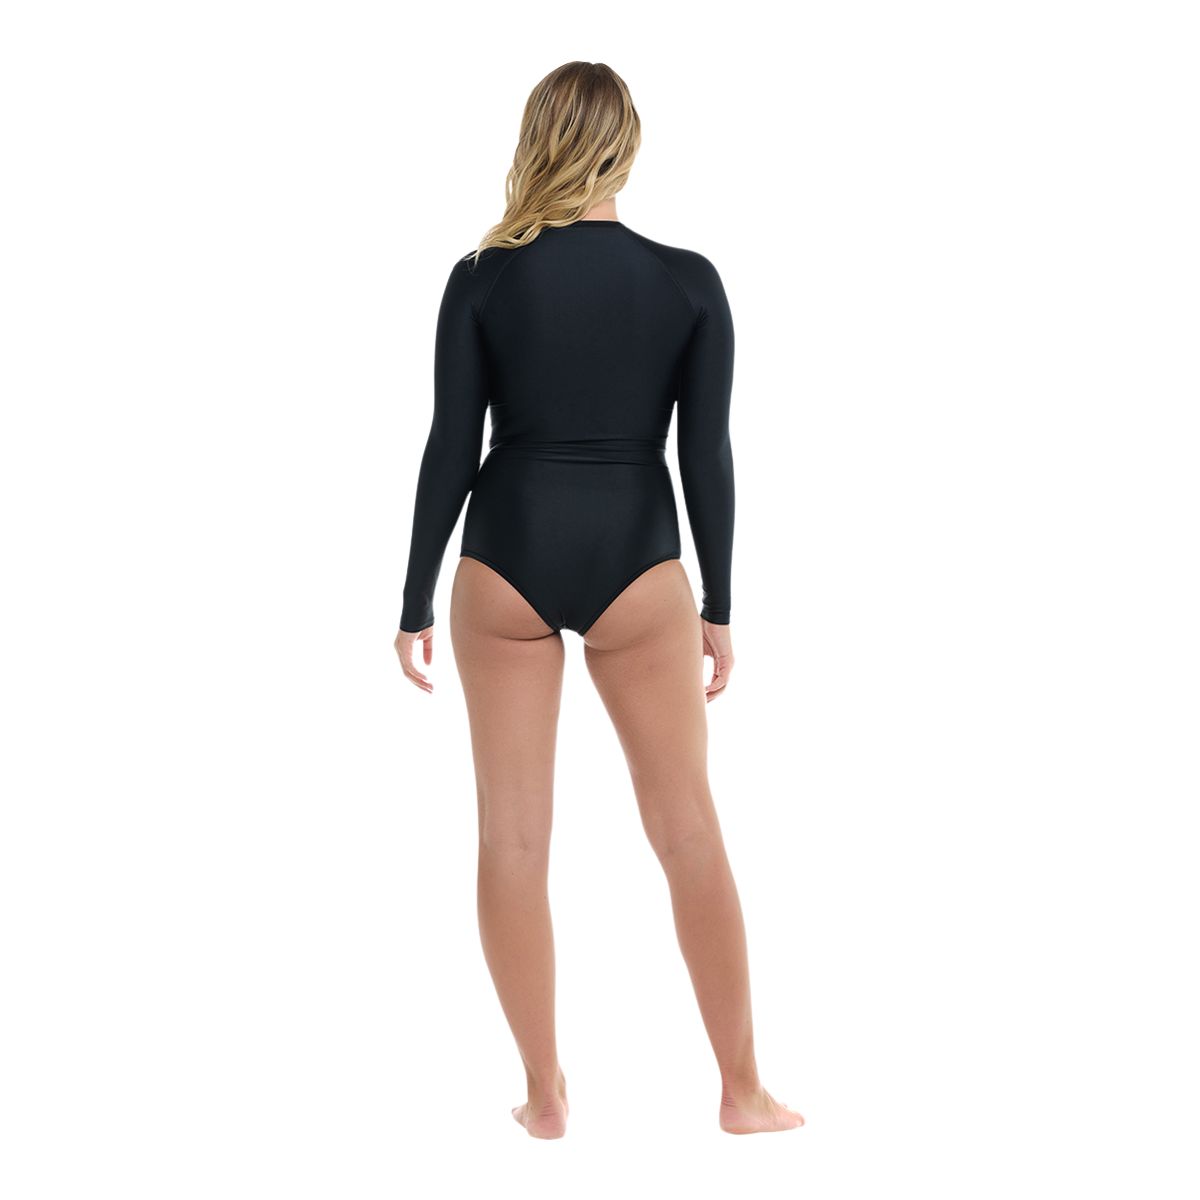 Body Glove Women's Smoothies Chanel Long Sleeve One Piece Swimsuit